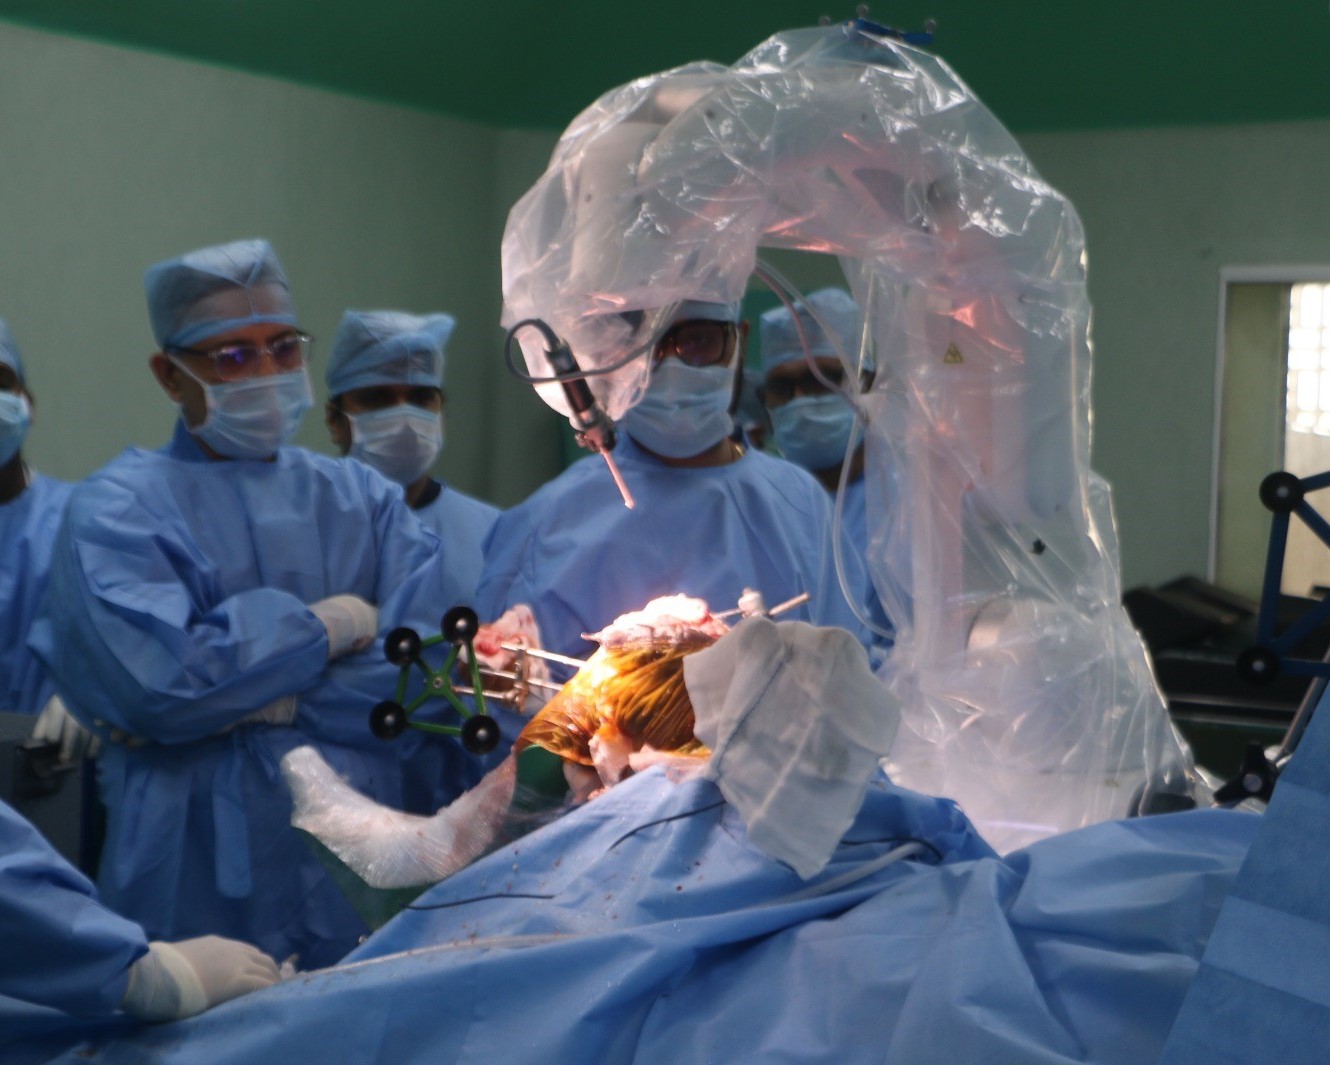 ROBOTIC-ASSISTED KNEE REPLACEMENT SURGERY ALLOWS GREATER PRECISION, BETTER RESULTS: PROF. DASH